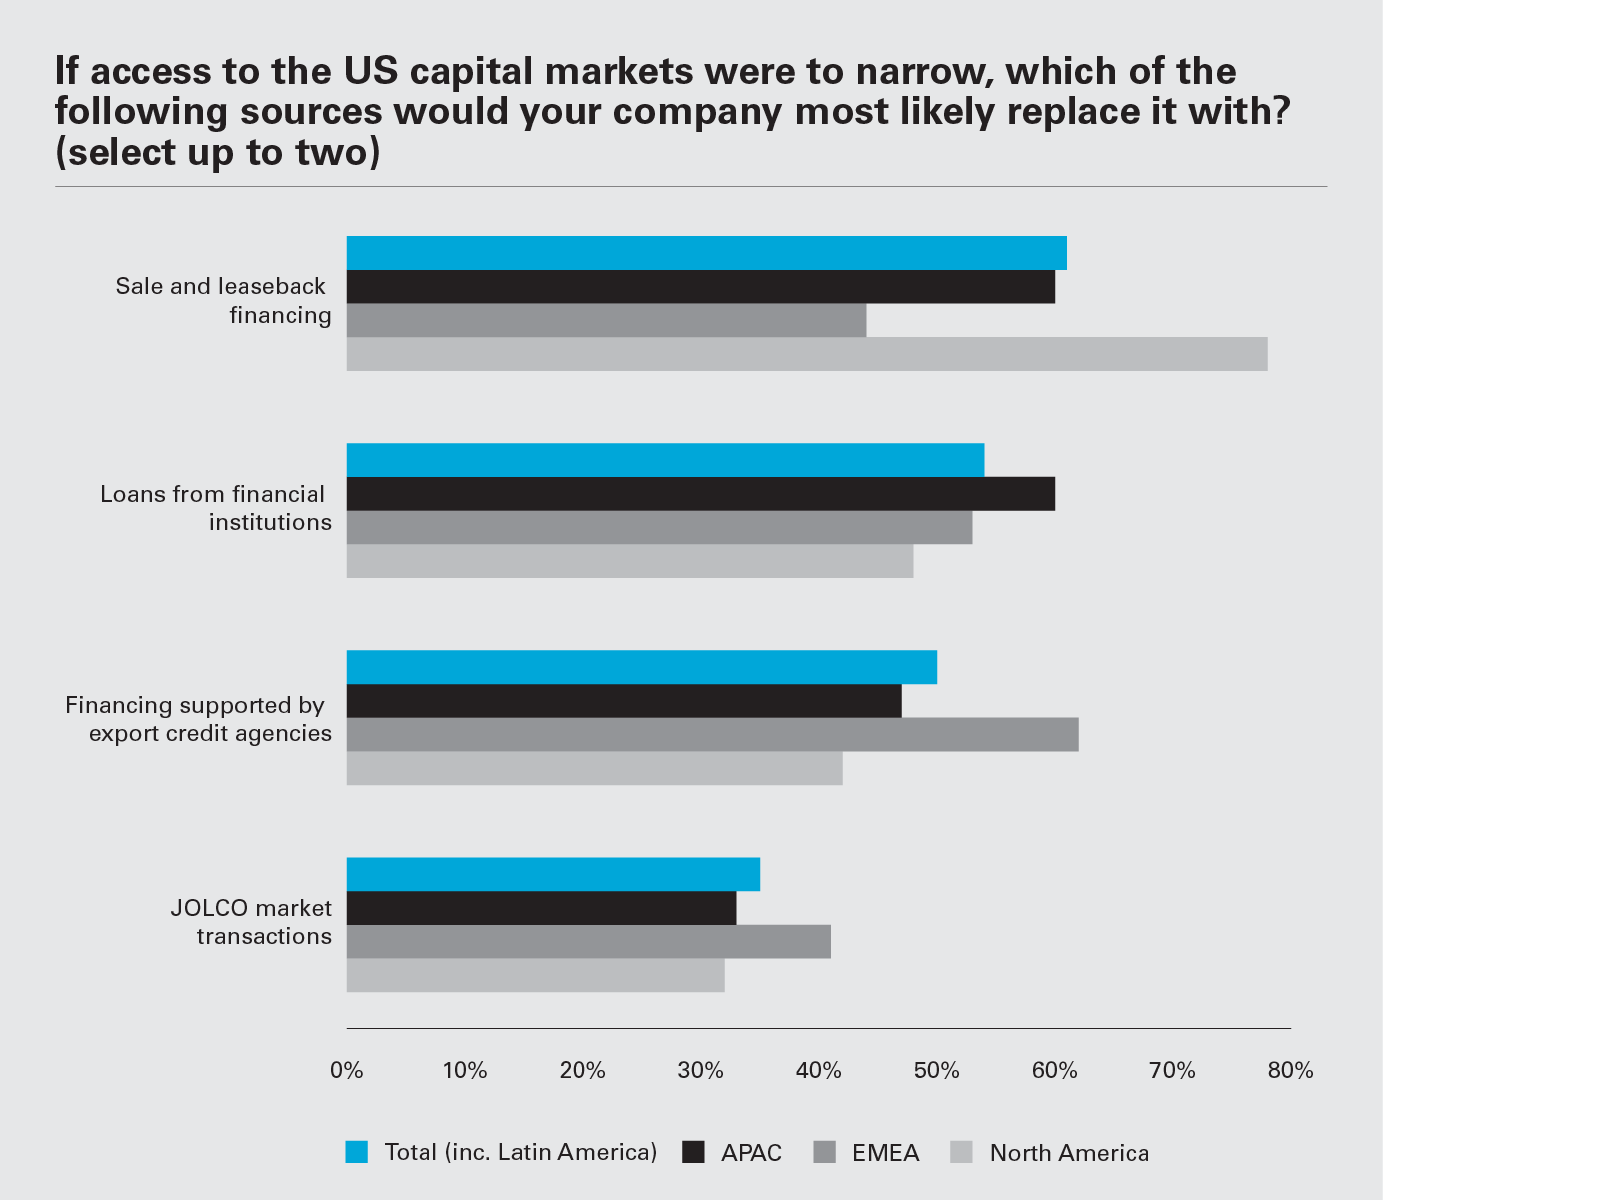 If access to the US capital markets were to narrow, which of the following sources would your company most likely replace it with? (Graph PNG)